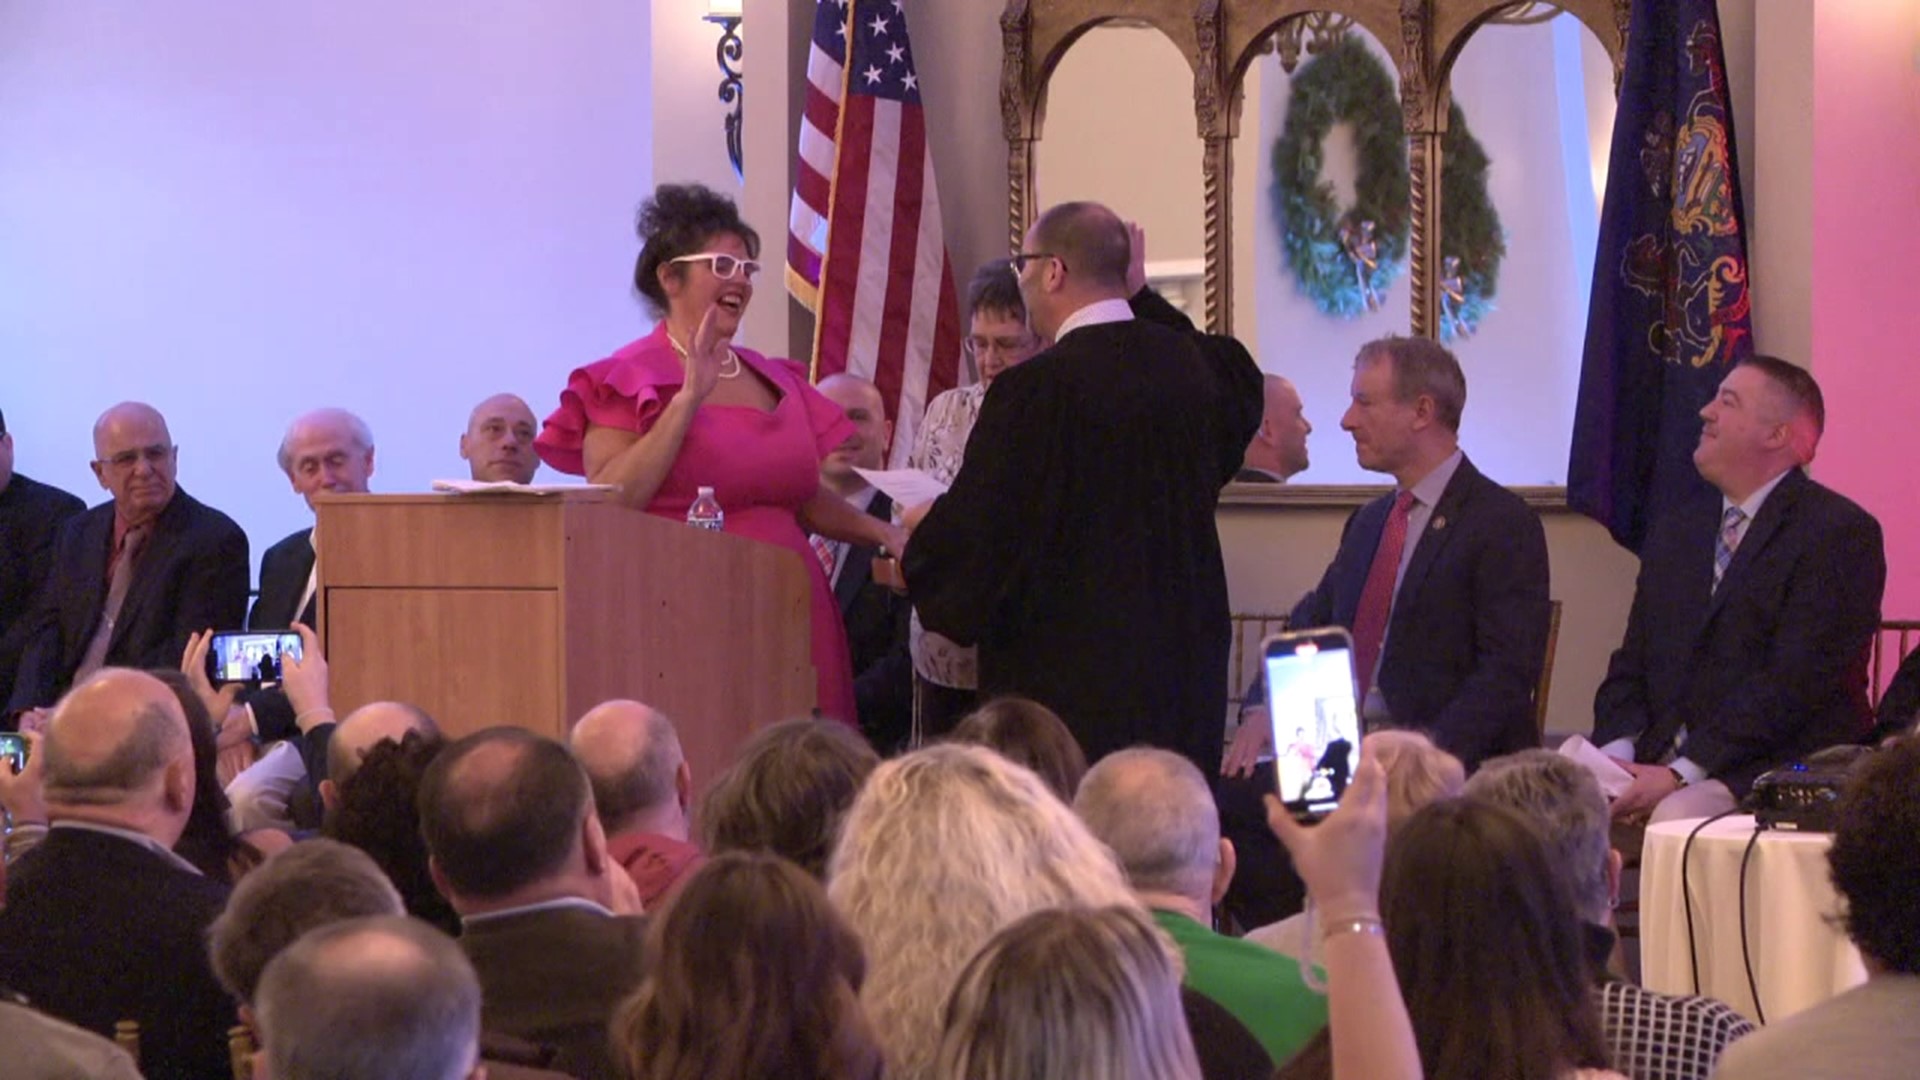 After nearly twenty years, the city of Carbondale officially has a new mayor.